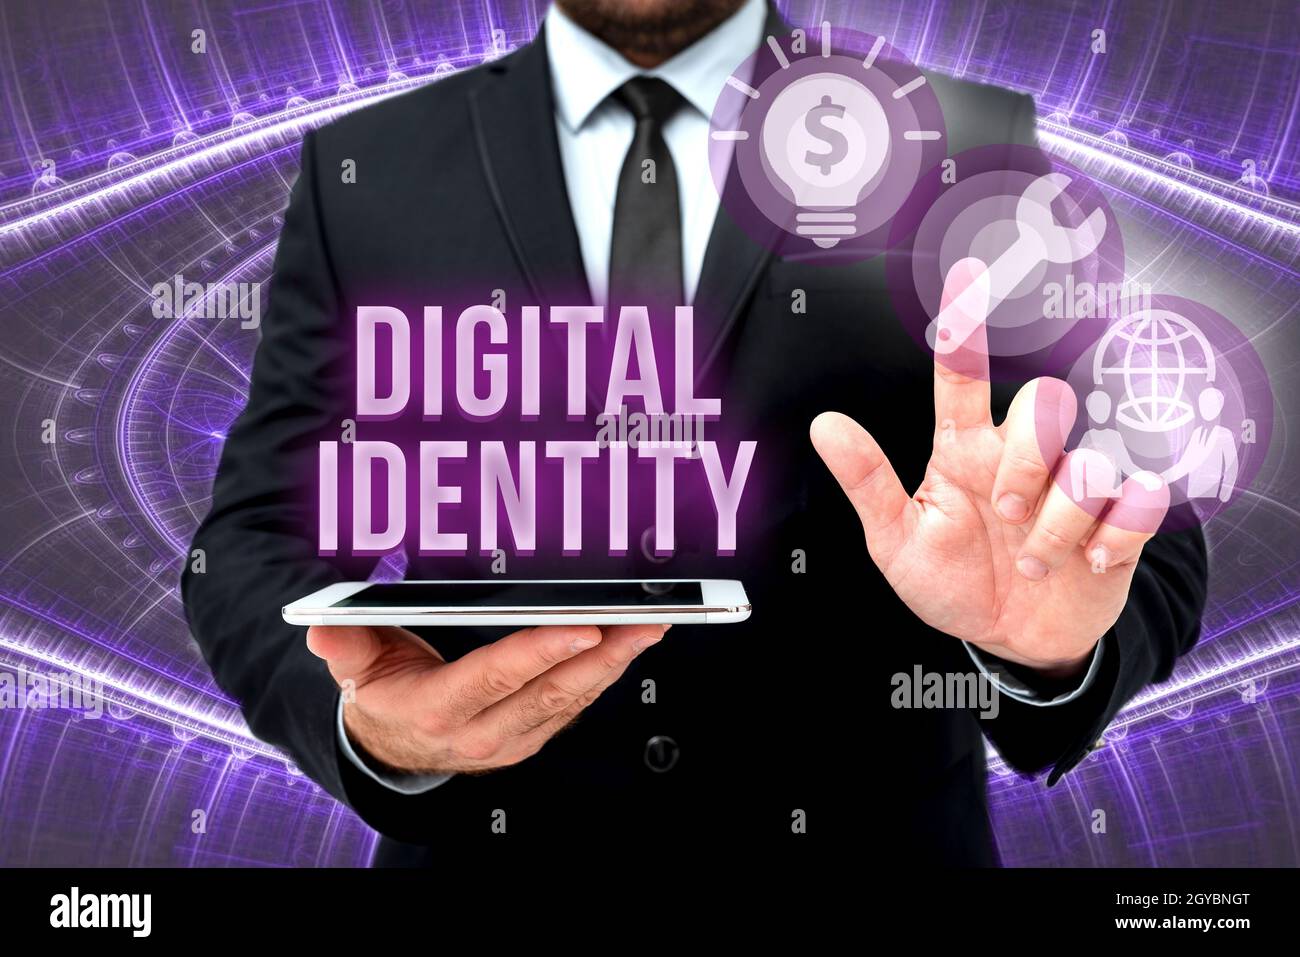 Sign displaying Digital Identity, Business idea networked identity adopted or claimed in cyberspace Man In Office Uniform Standing Pressing Virtual Bu Stock Photo